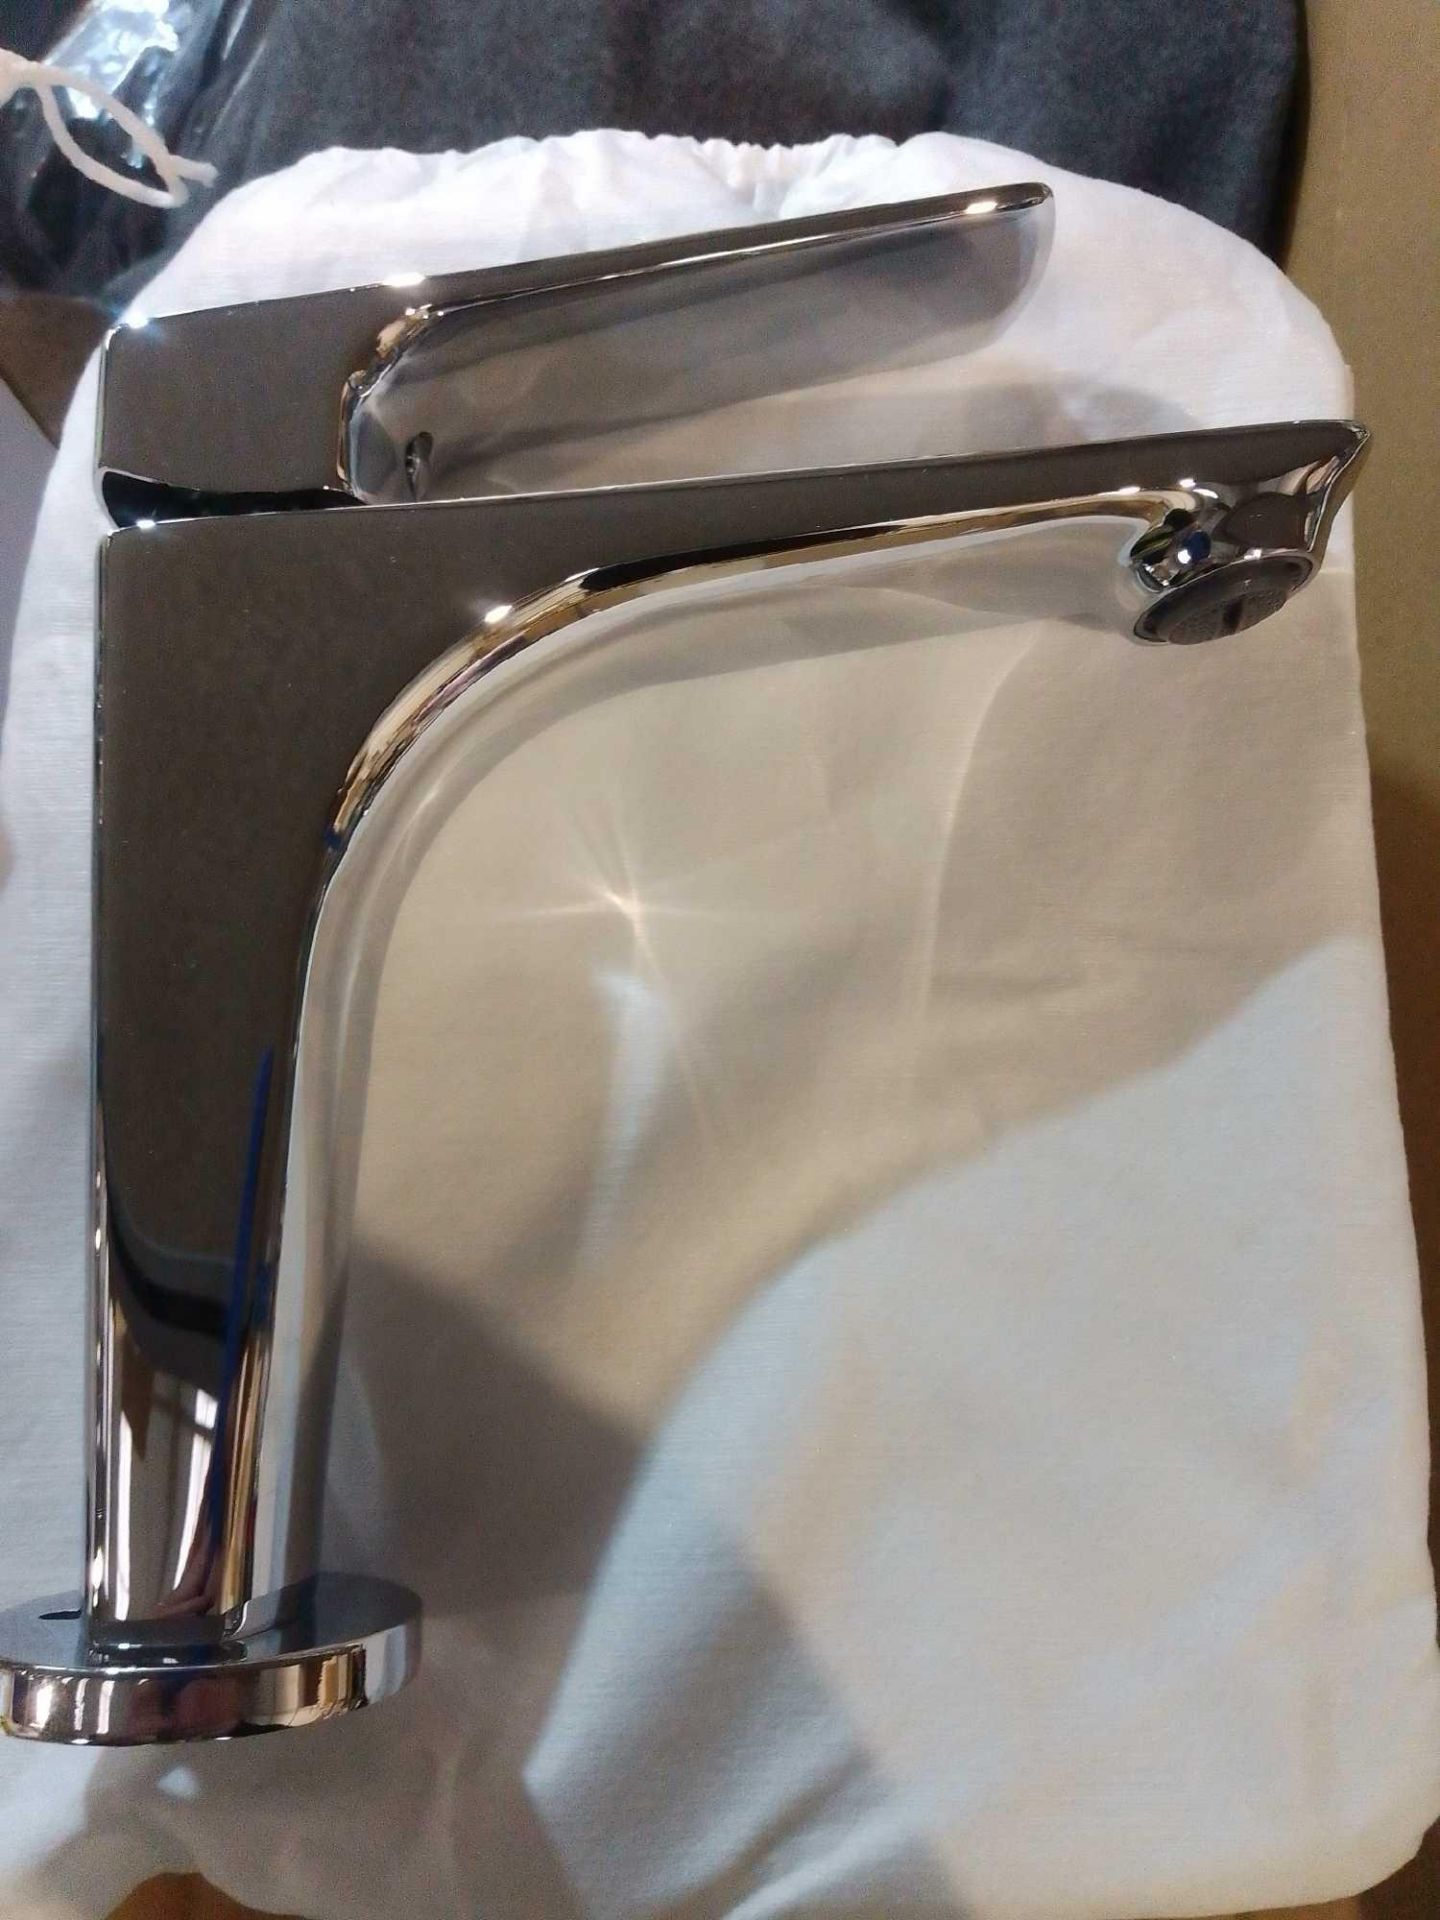 RRP £150 Boxed Brand New 1293593C Hot And Cold Chrome Finish Mixer Tap (Appraisals Available On